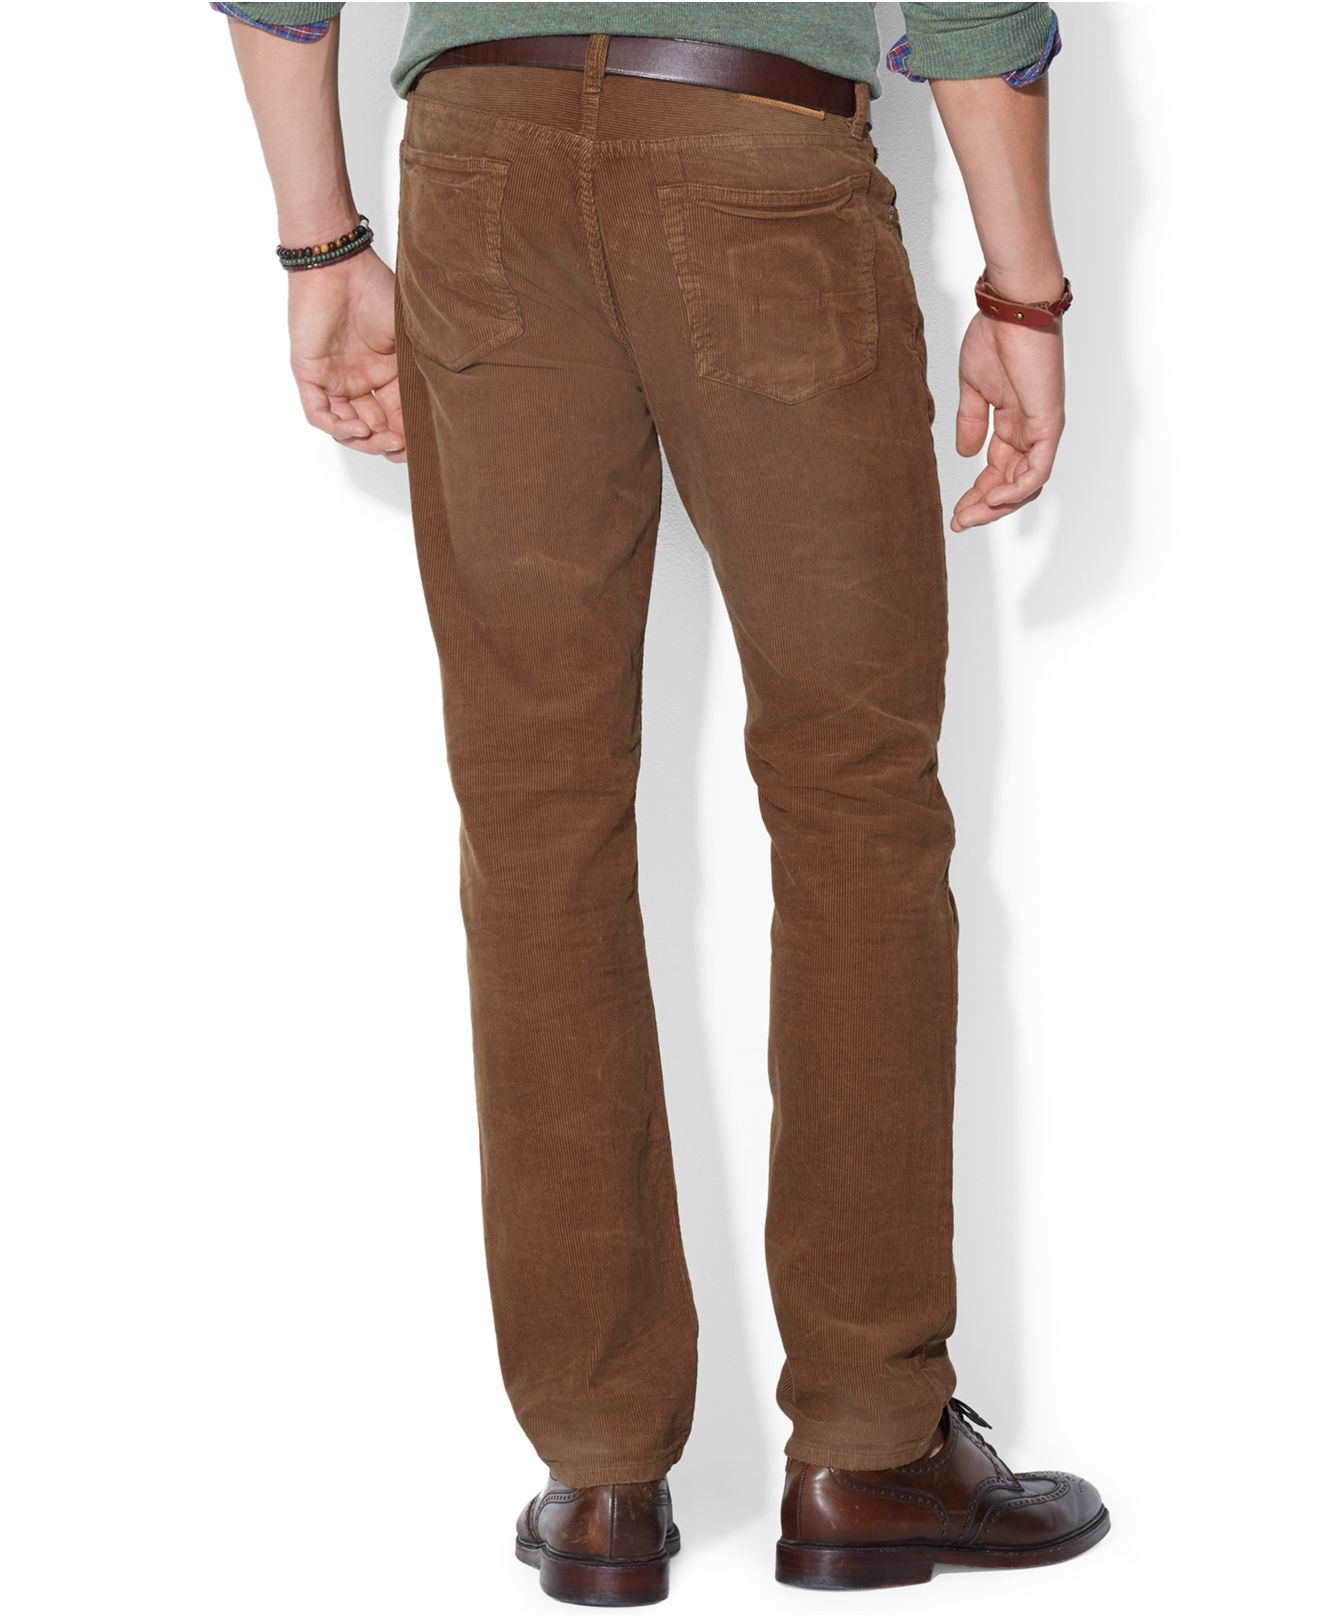 Lyst - Polo Ralph Lauren Straight-Fit 5-Pocket Corduroy Pants in Brown ...